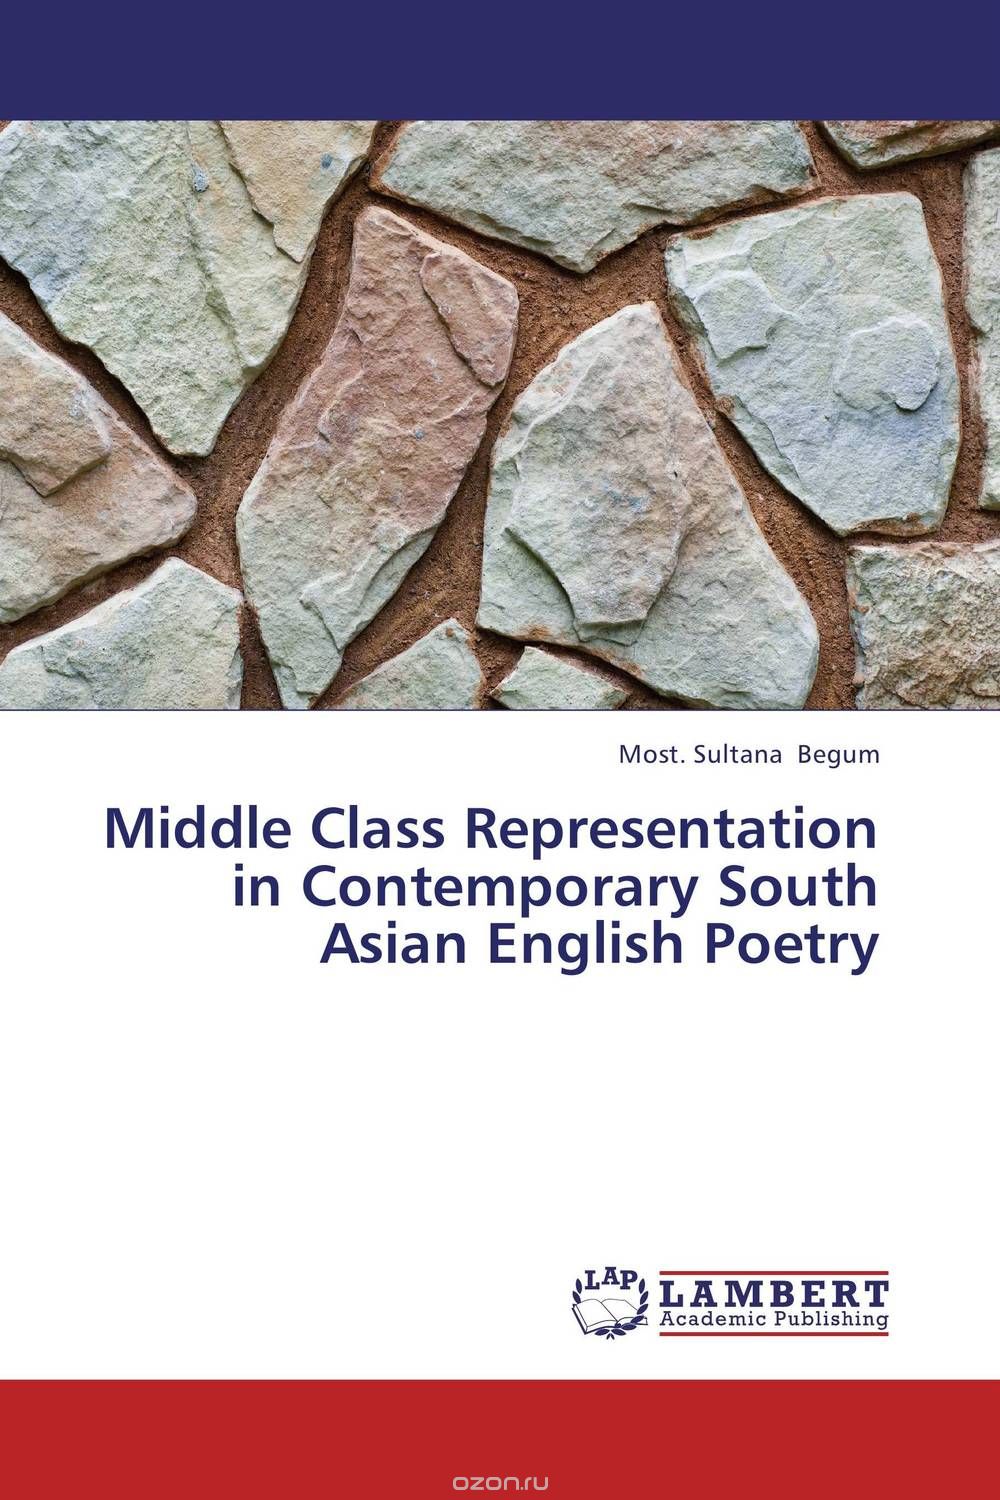 Middle Class Representation in Contemporary South Asian English Poetry